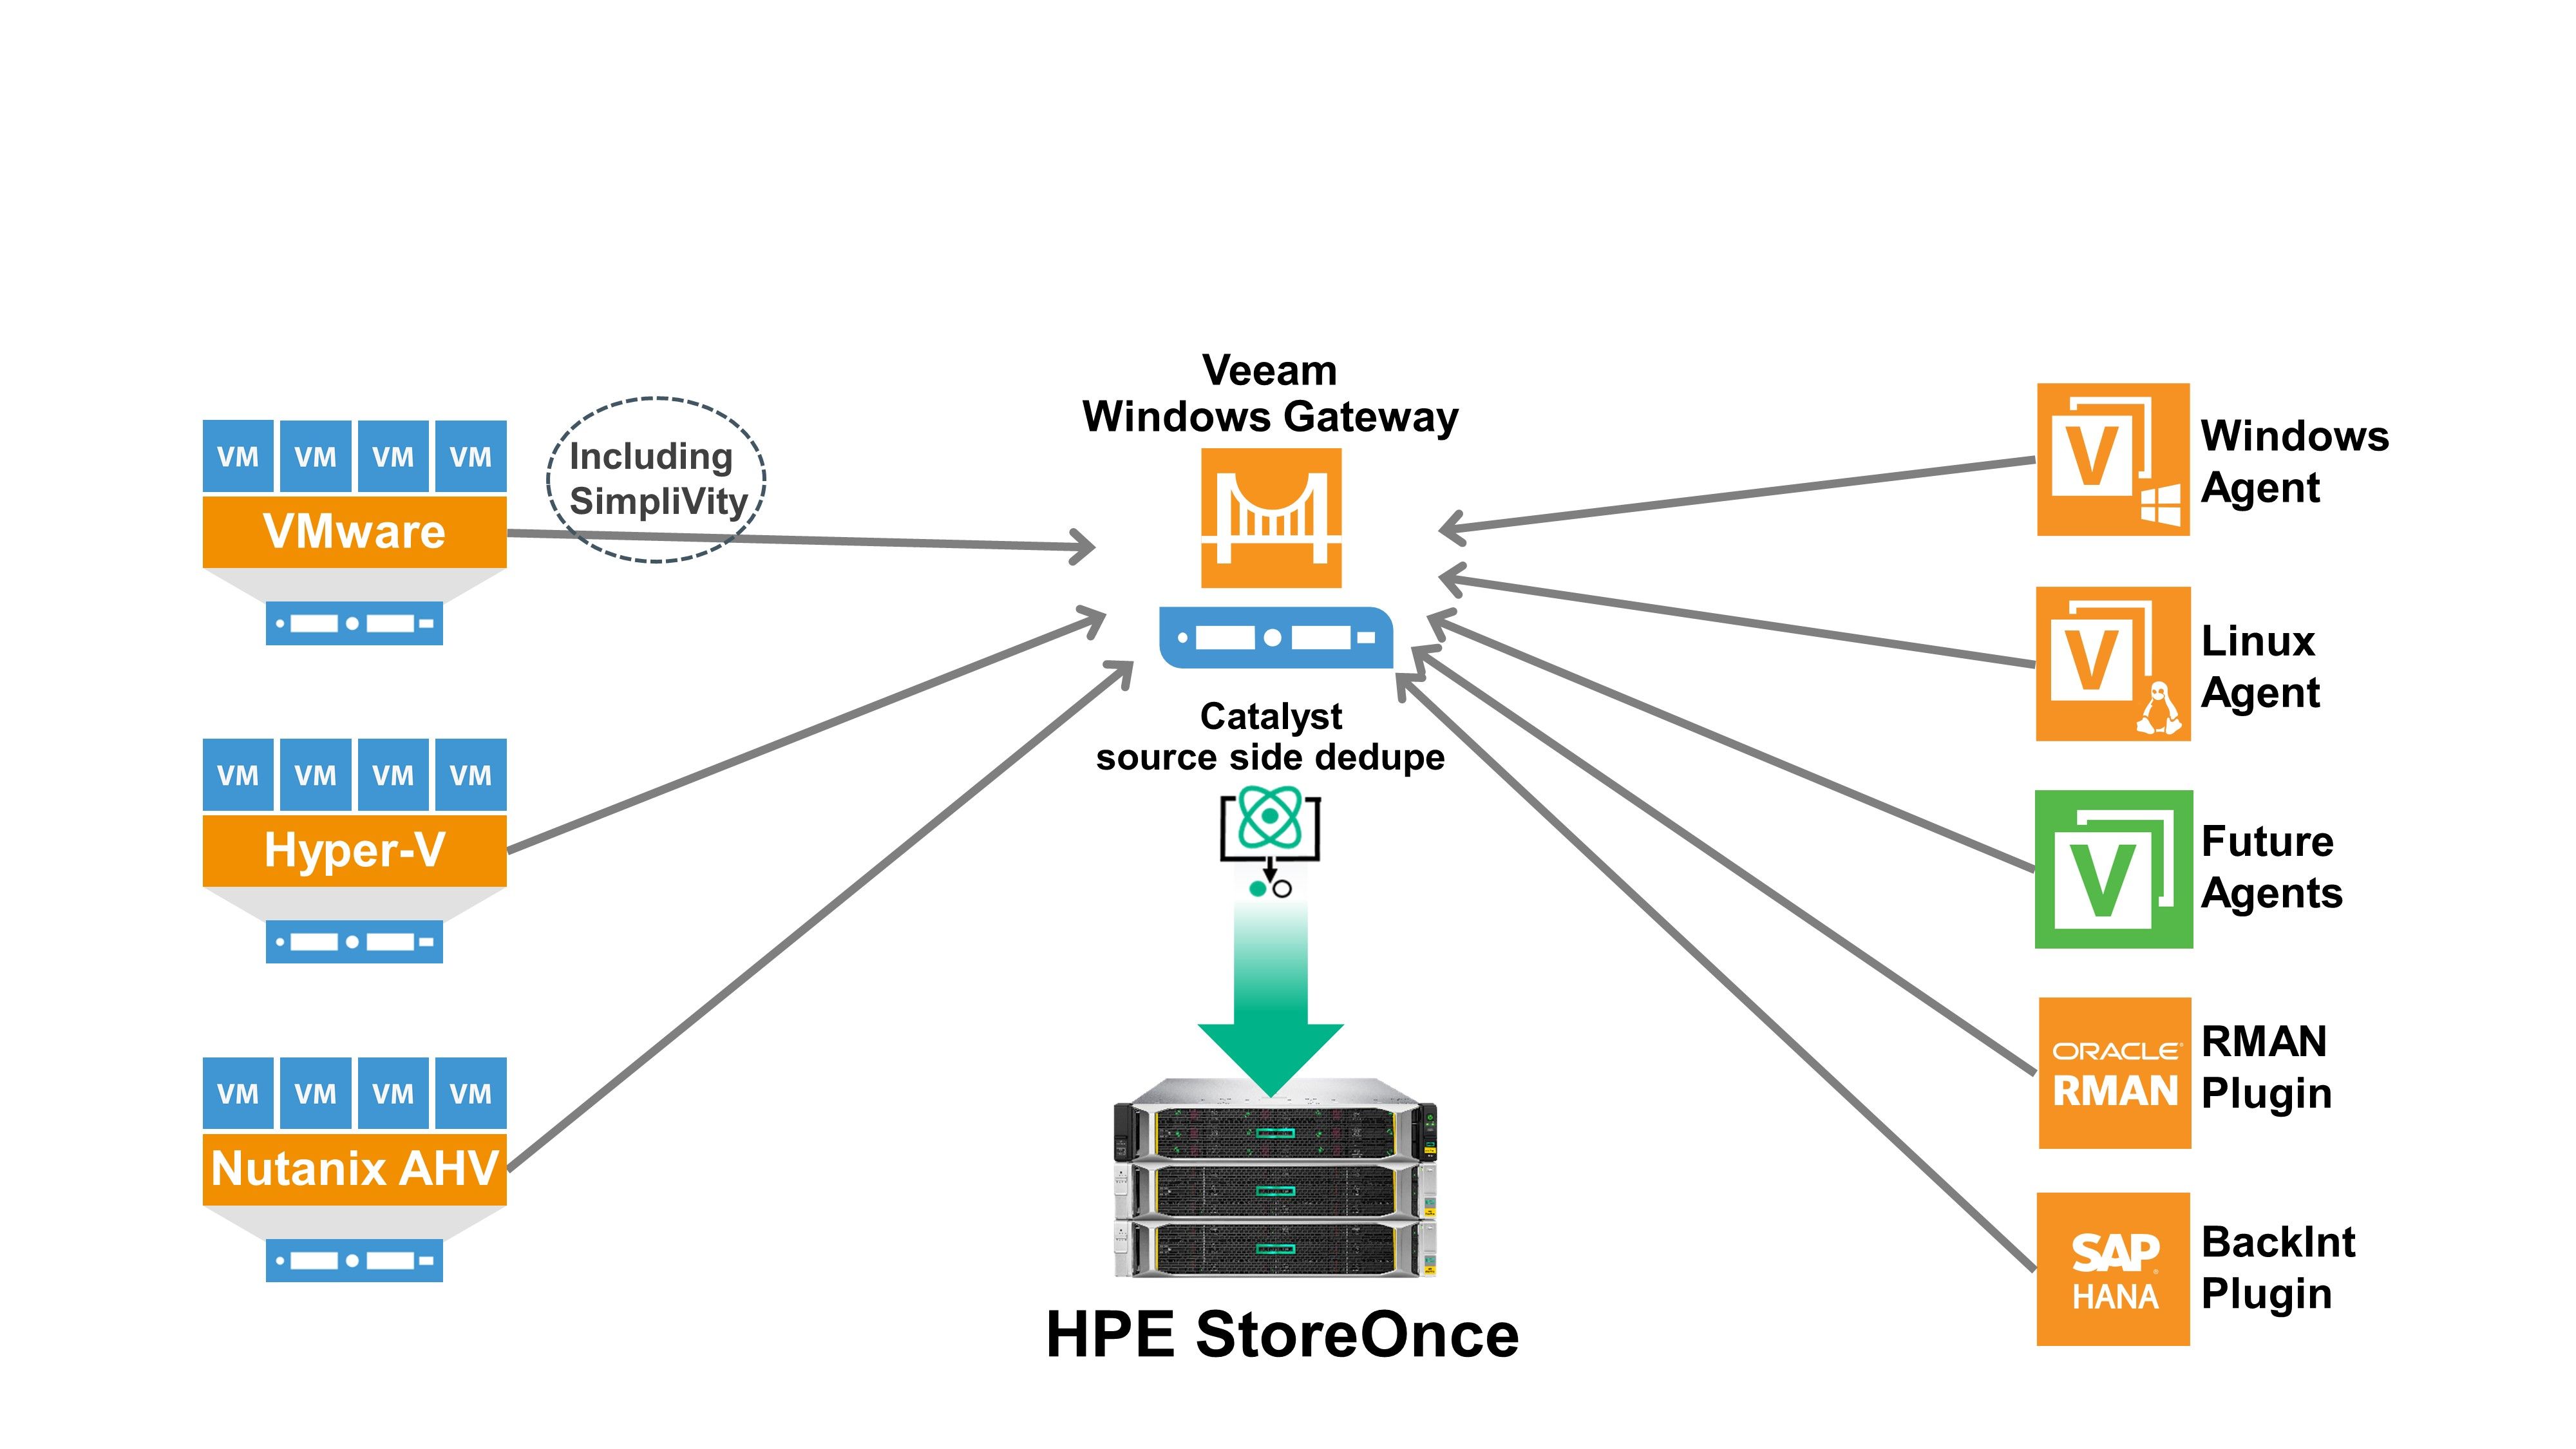 Veeam-wide support for StoreOnce-Catalyst backup target